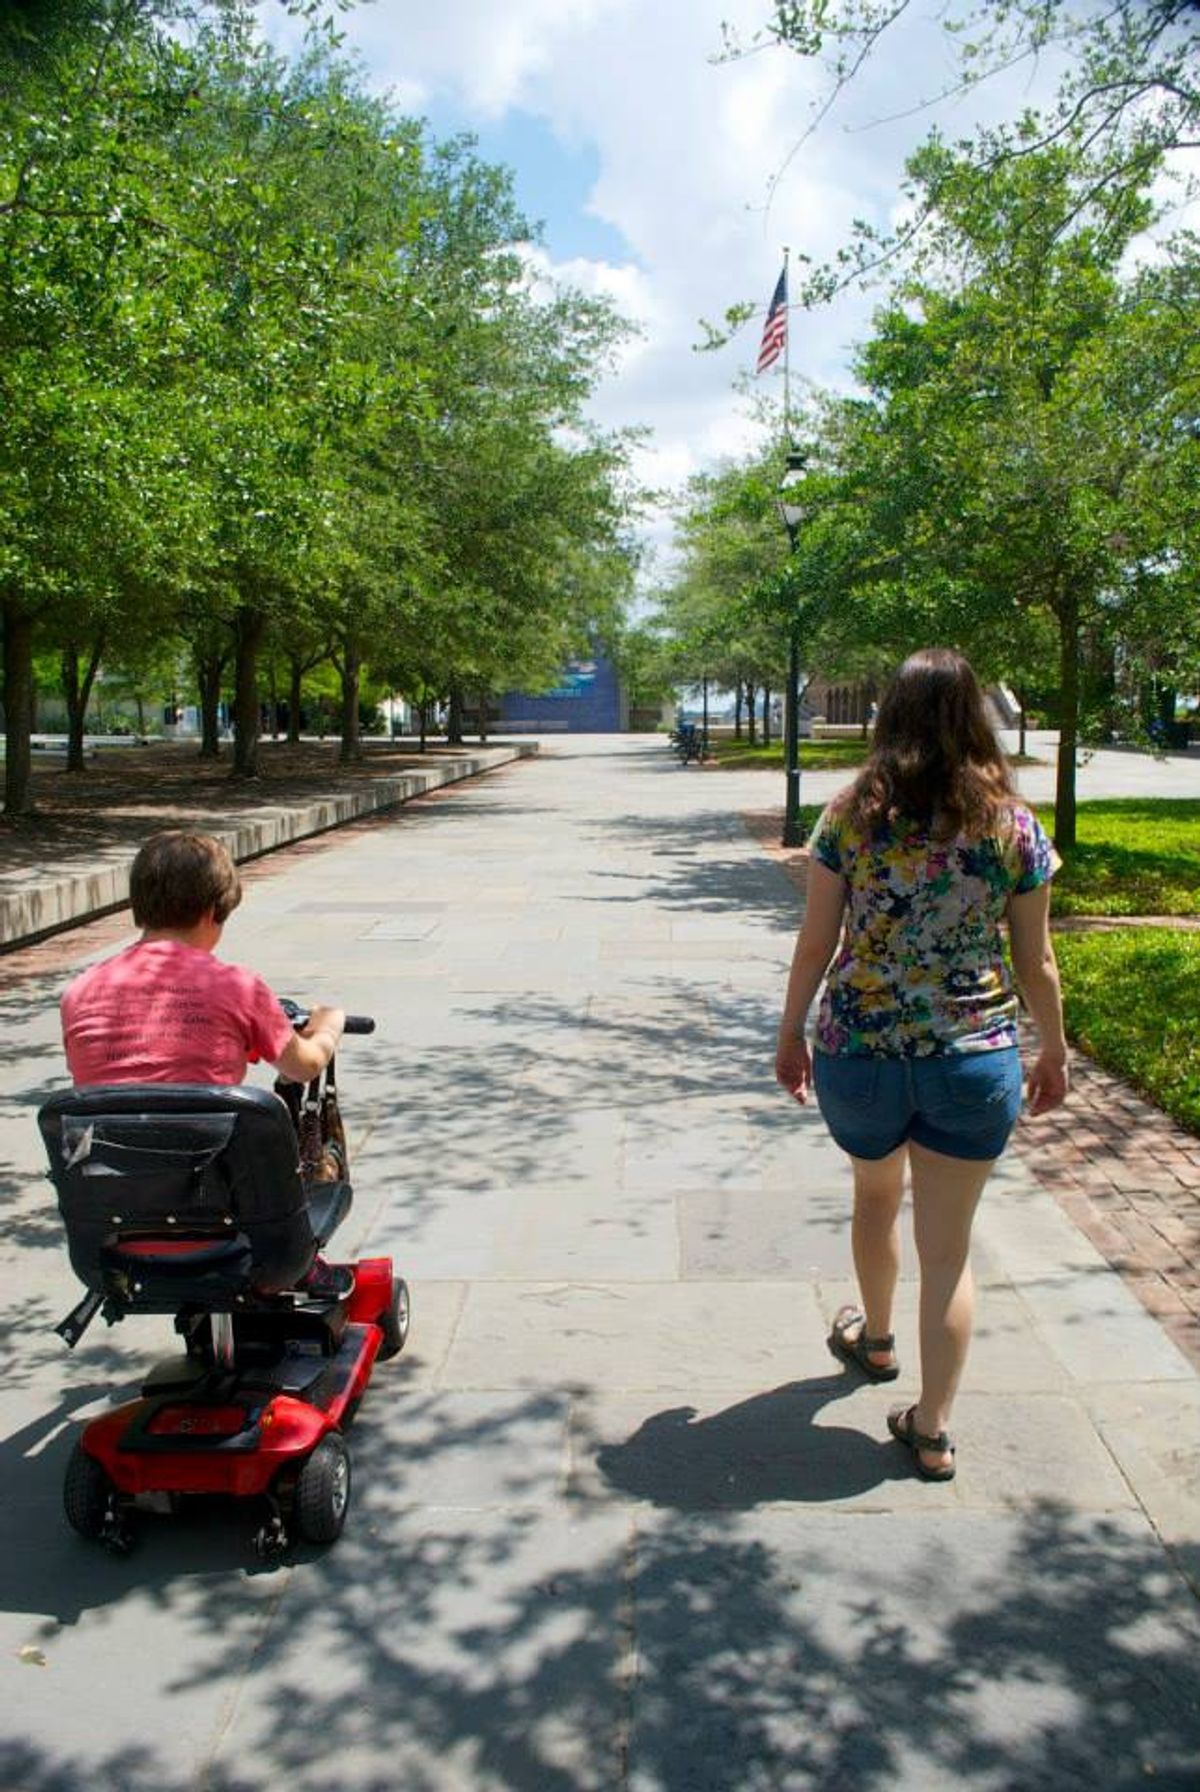 10 Things People Using Wheelchairs Want You To Know